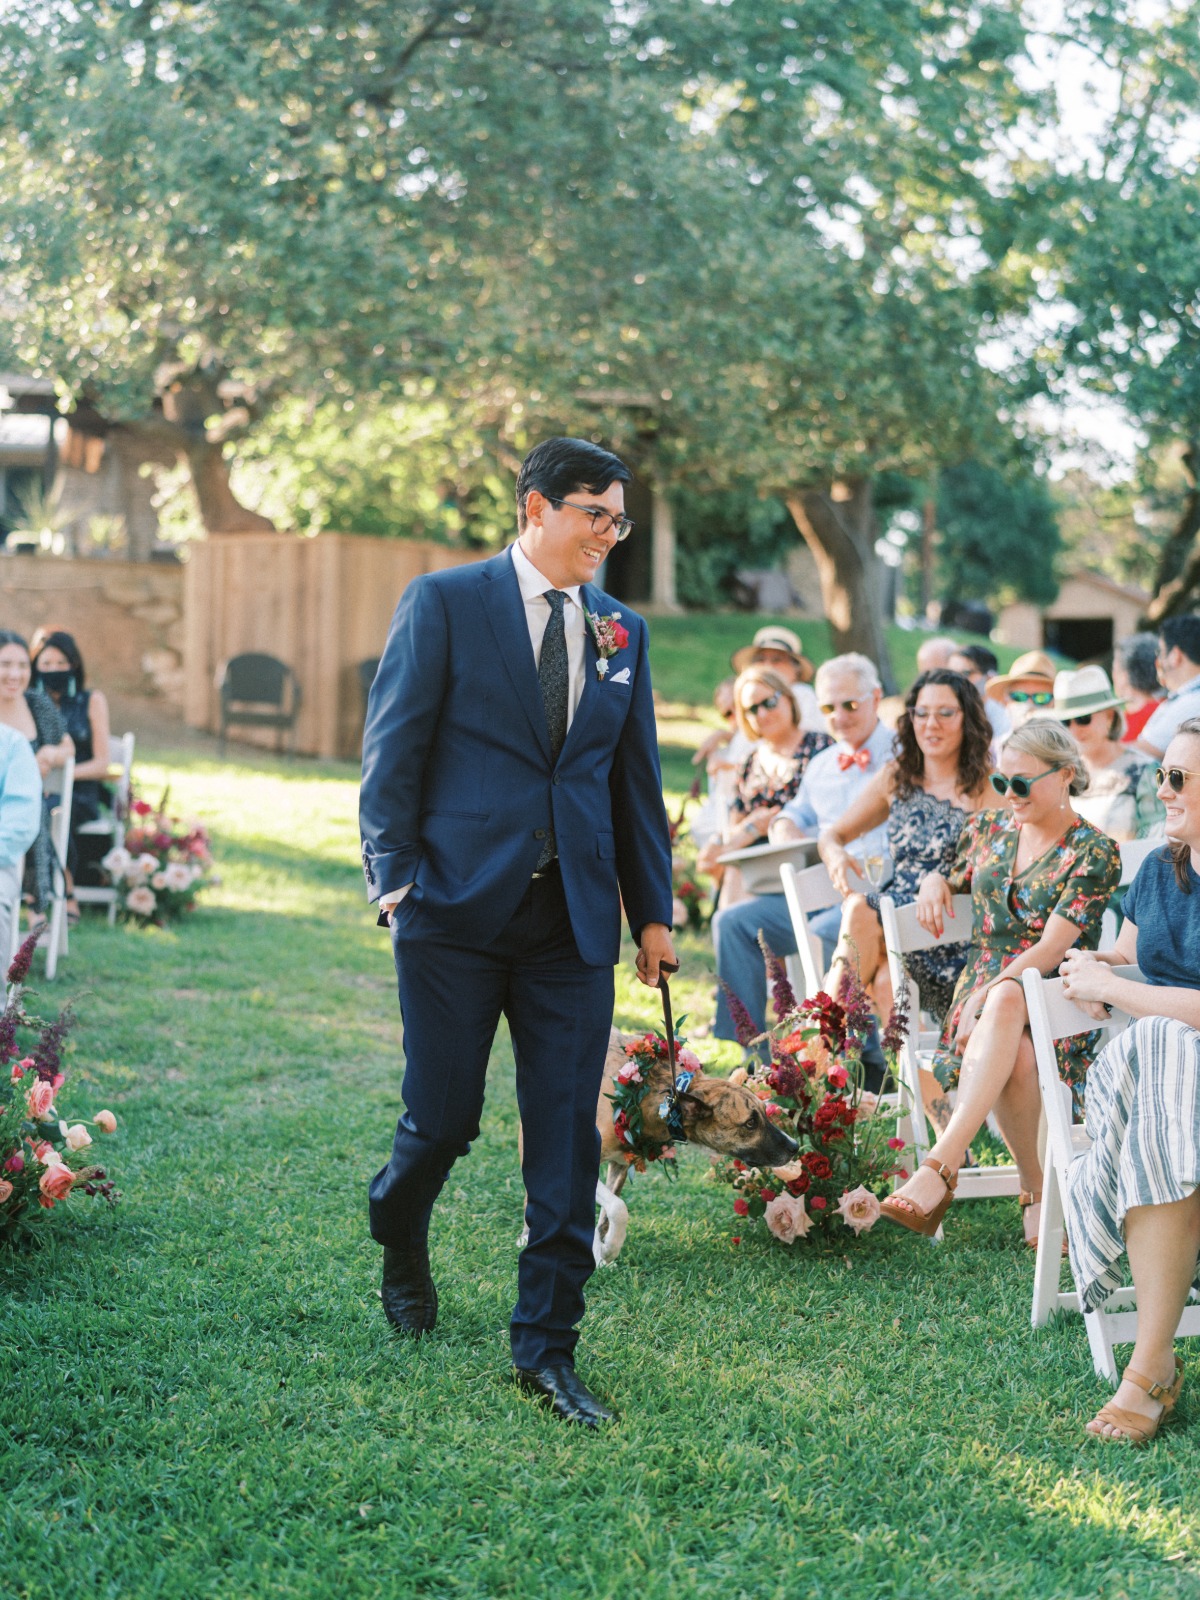 The Texas Couple Kept Their Wedding Date and Nailed Plan B